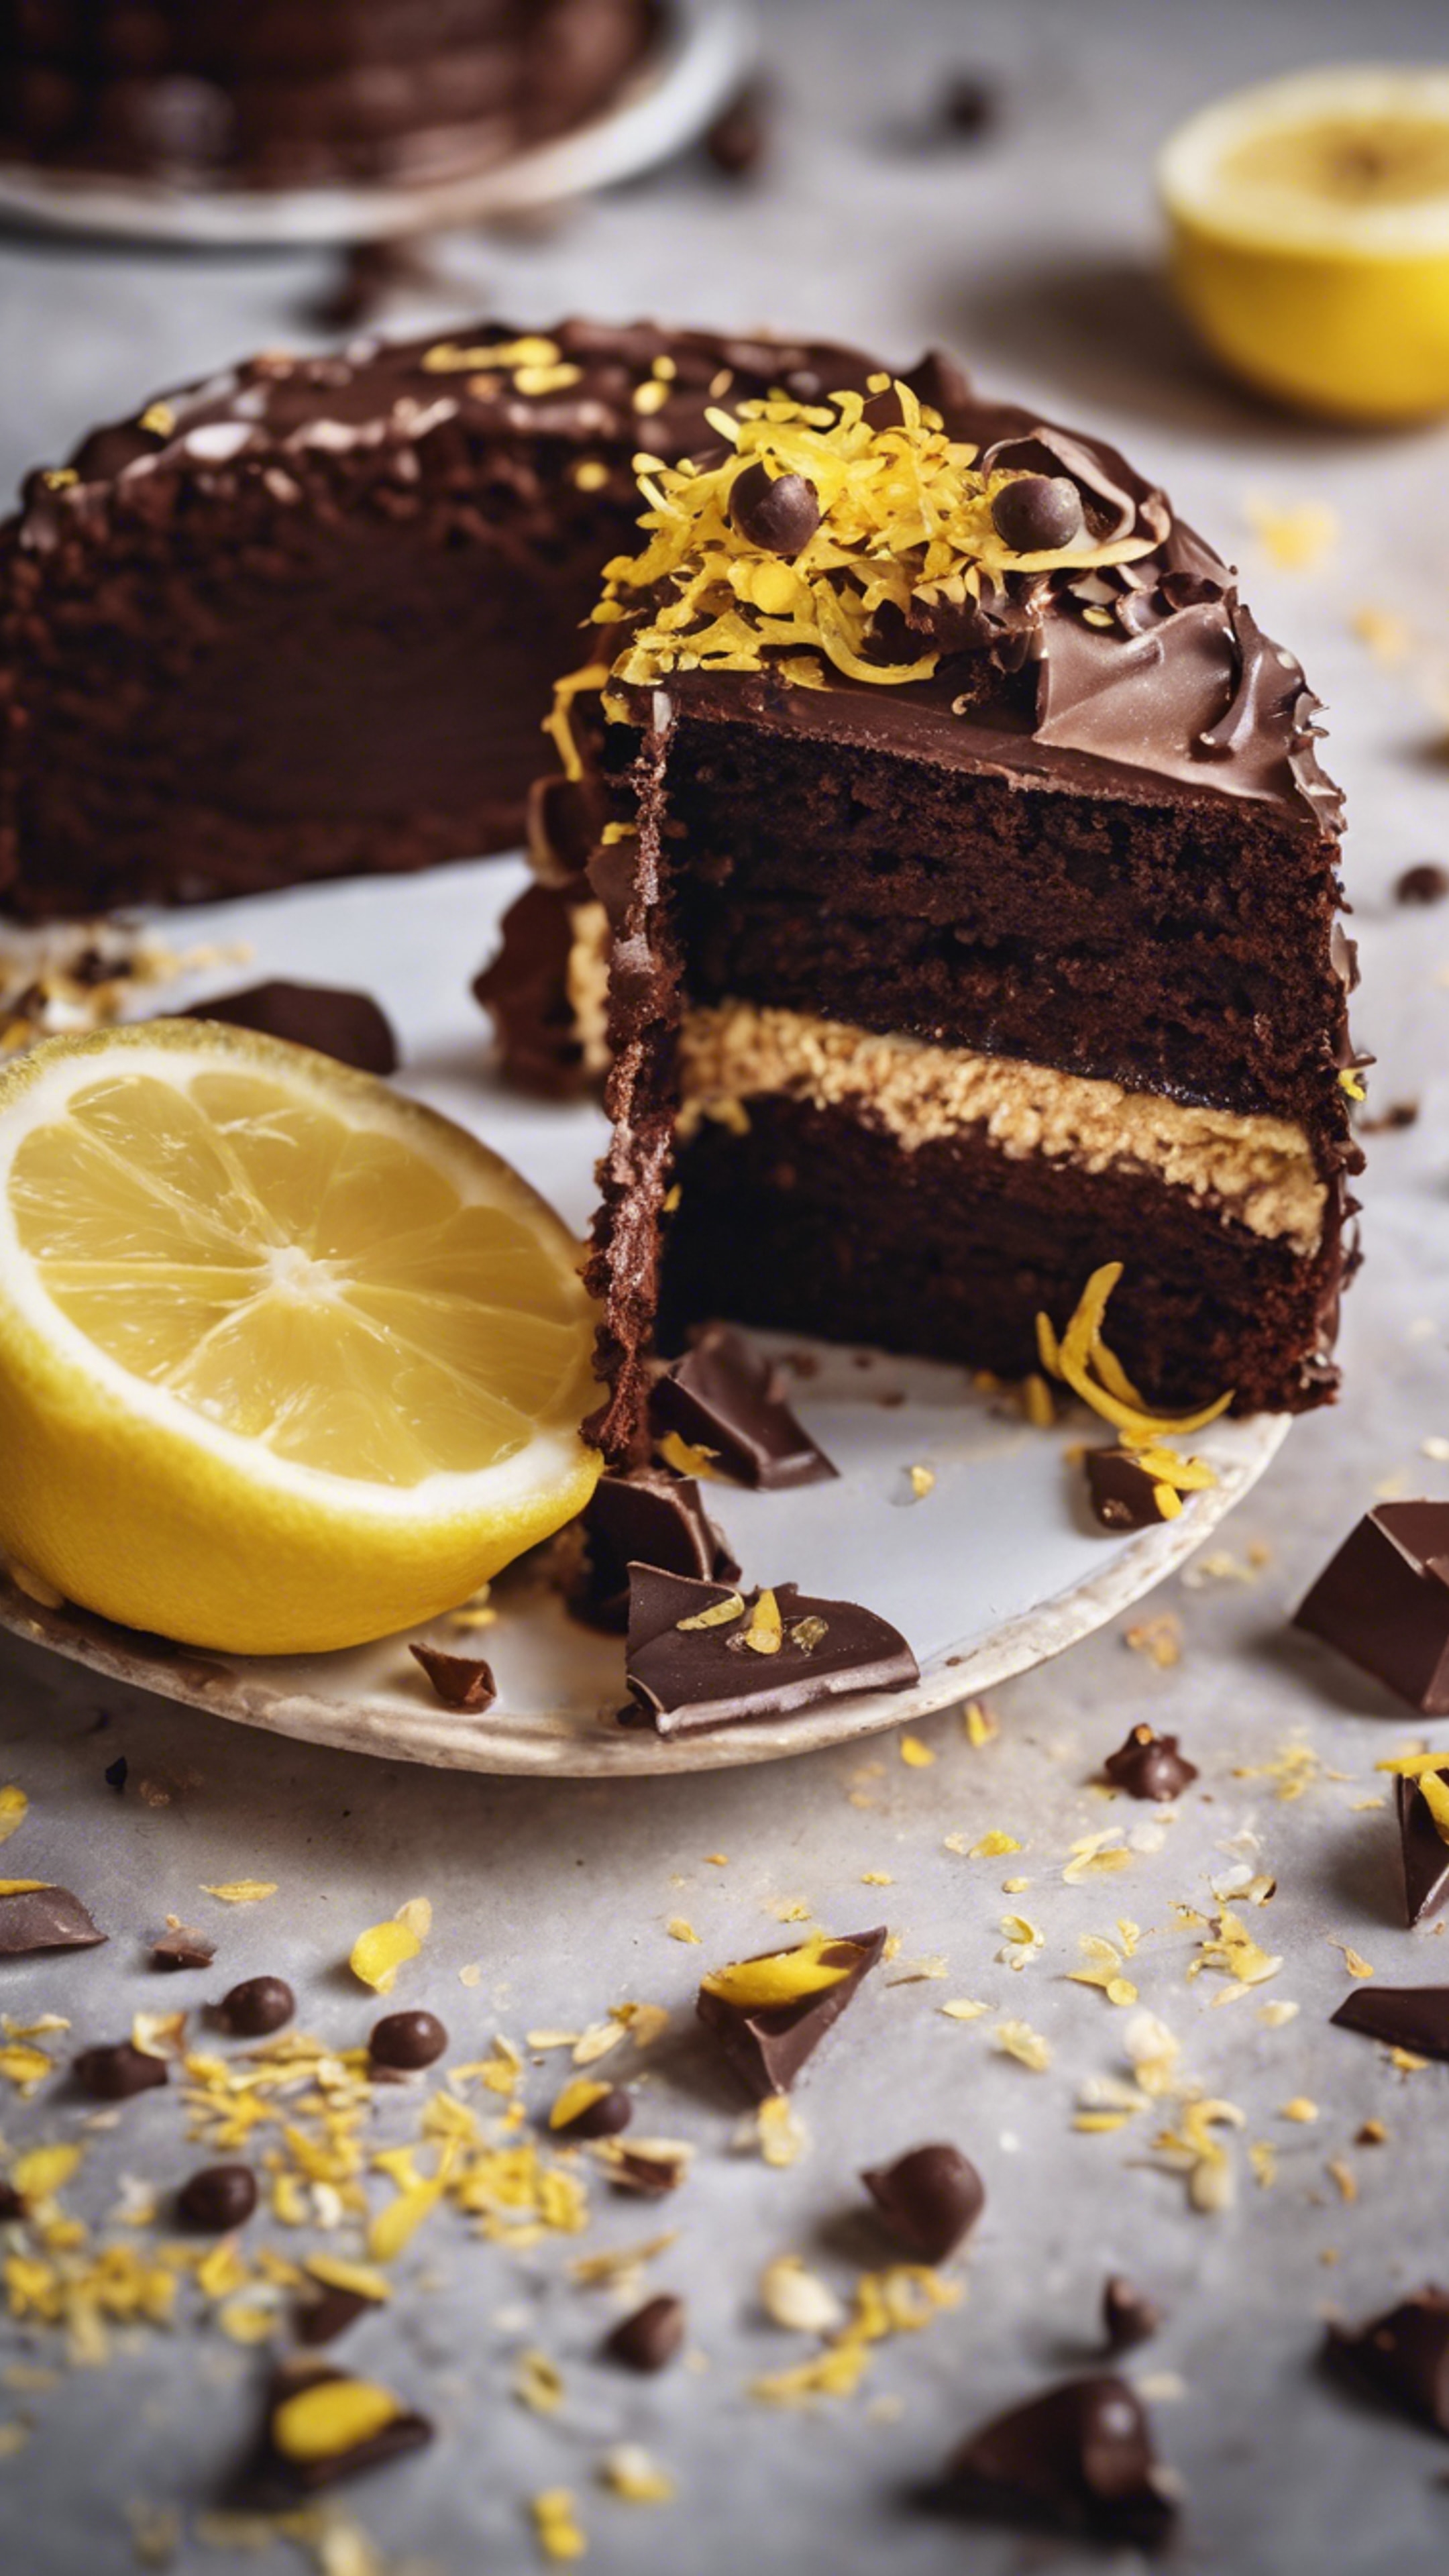 A slice of rich chocolate cake with yellow lemon zest sprinkled on top. Валлпапер[a5c73c6ece1941b4ba95]